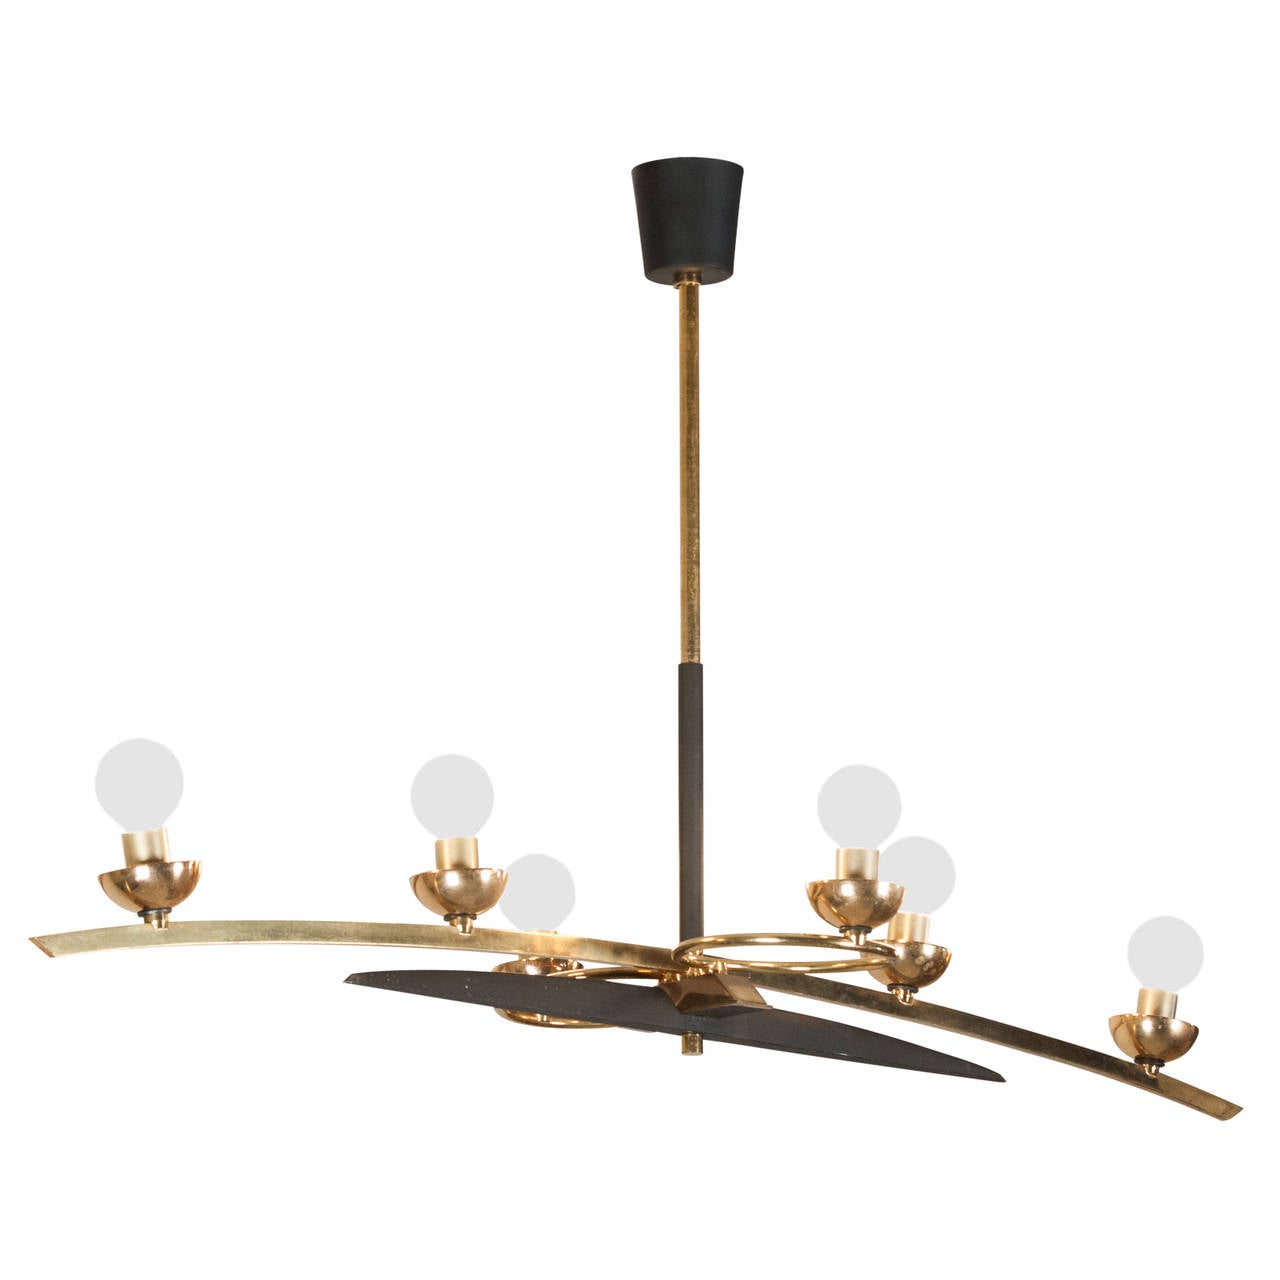 Elongated brass and lacquered metal six-light chandelier, four lights on the main axis, with two lights traverse, French, 1950s. Measures: Length 38 in, width 15 in, overall height 20 in. (Item #2281).